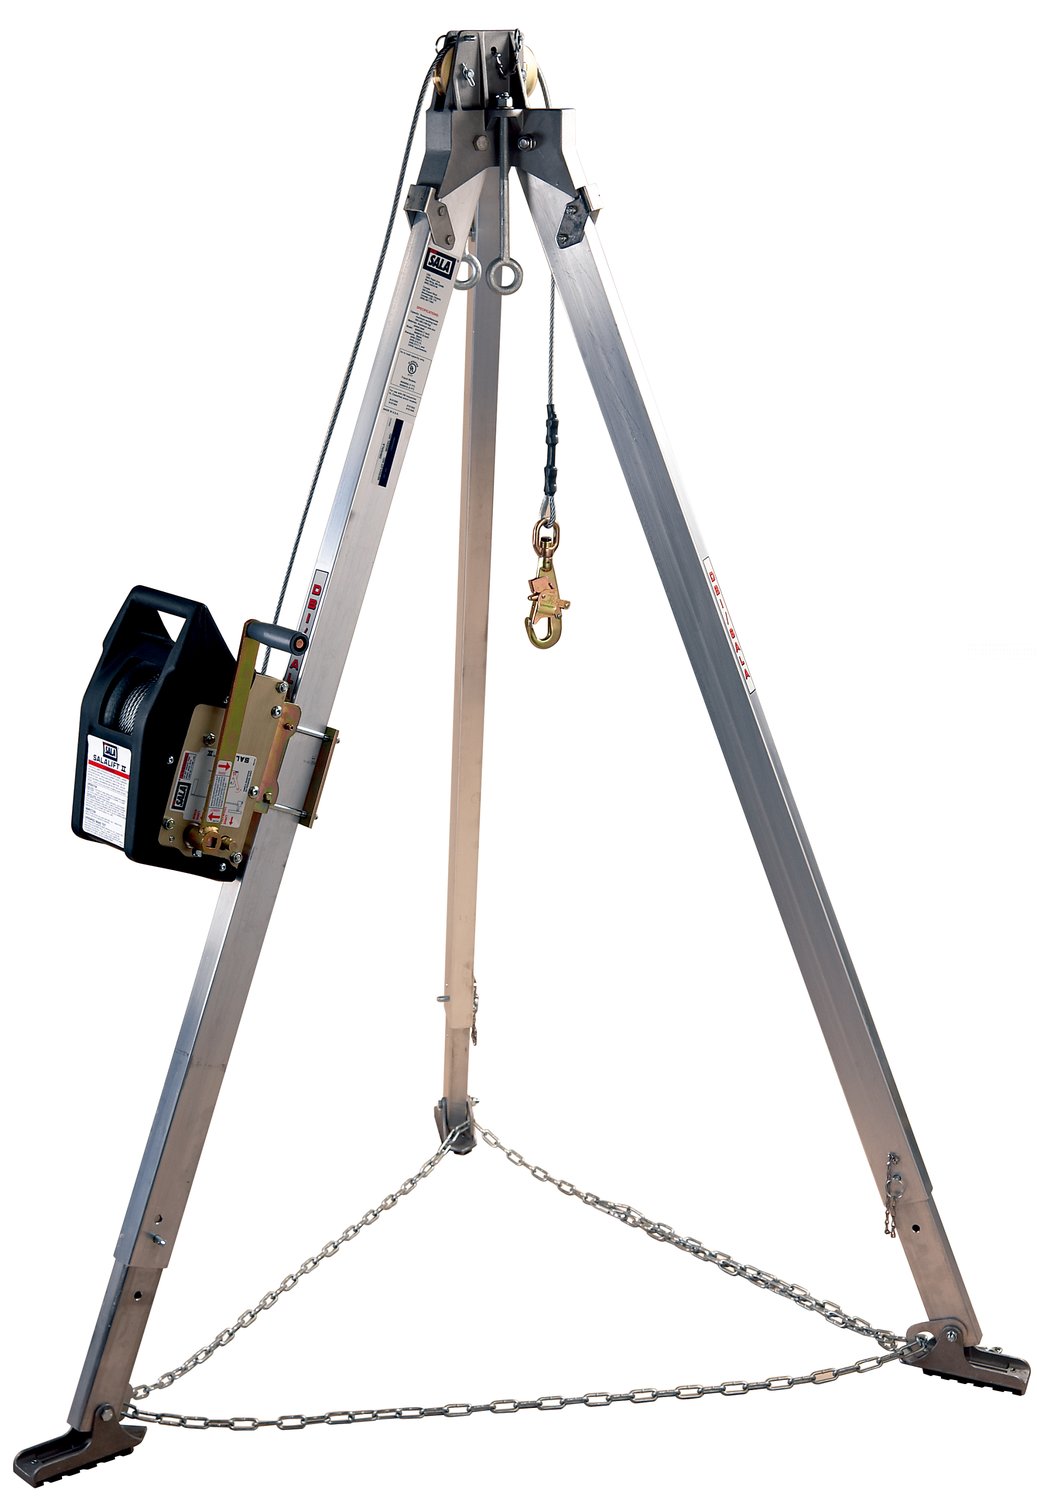 7100240698 - 3M DBI-SALA Confined Space Aluminum Tripod with Winch 8300041, 9 ft High, 60 ft Stainless Steel Cable